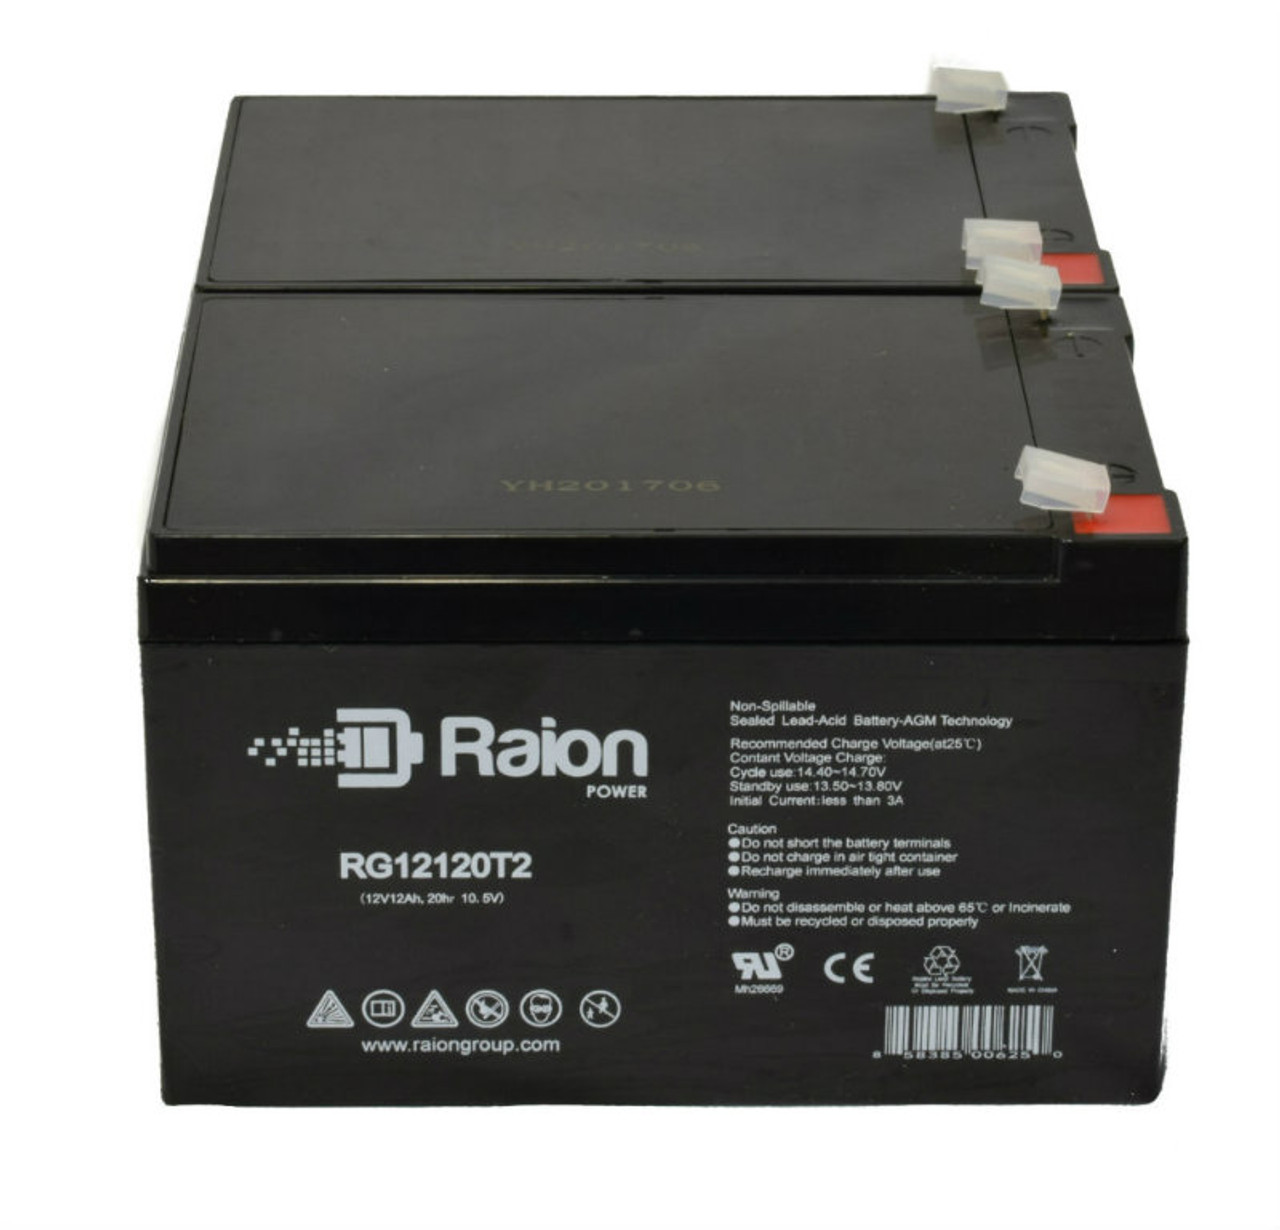 Raion Power RG12120T2 Replacement Battery Set for Zip'r 4- Xtra Hybrid Mobility Scooter - 2 Pack